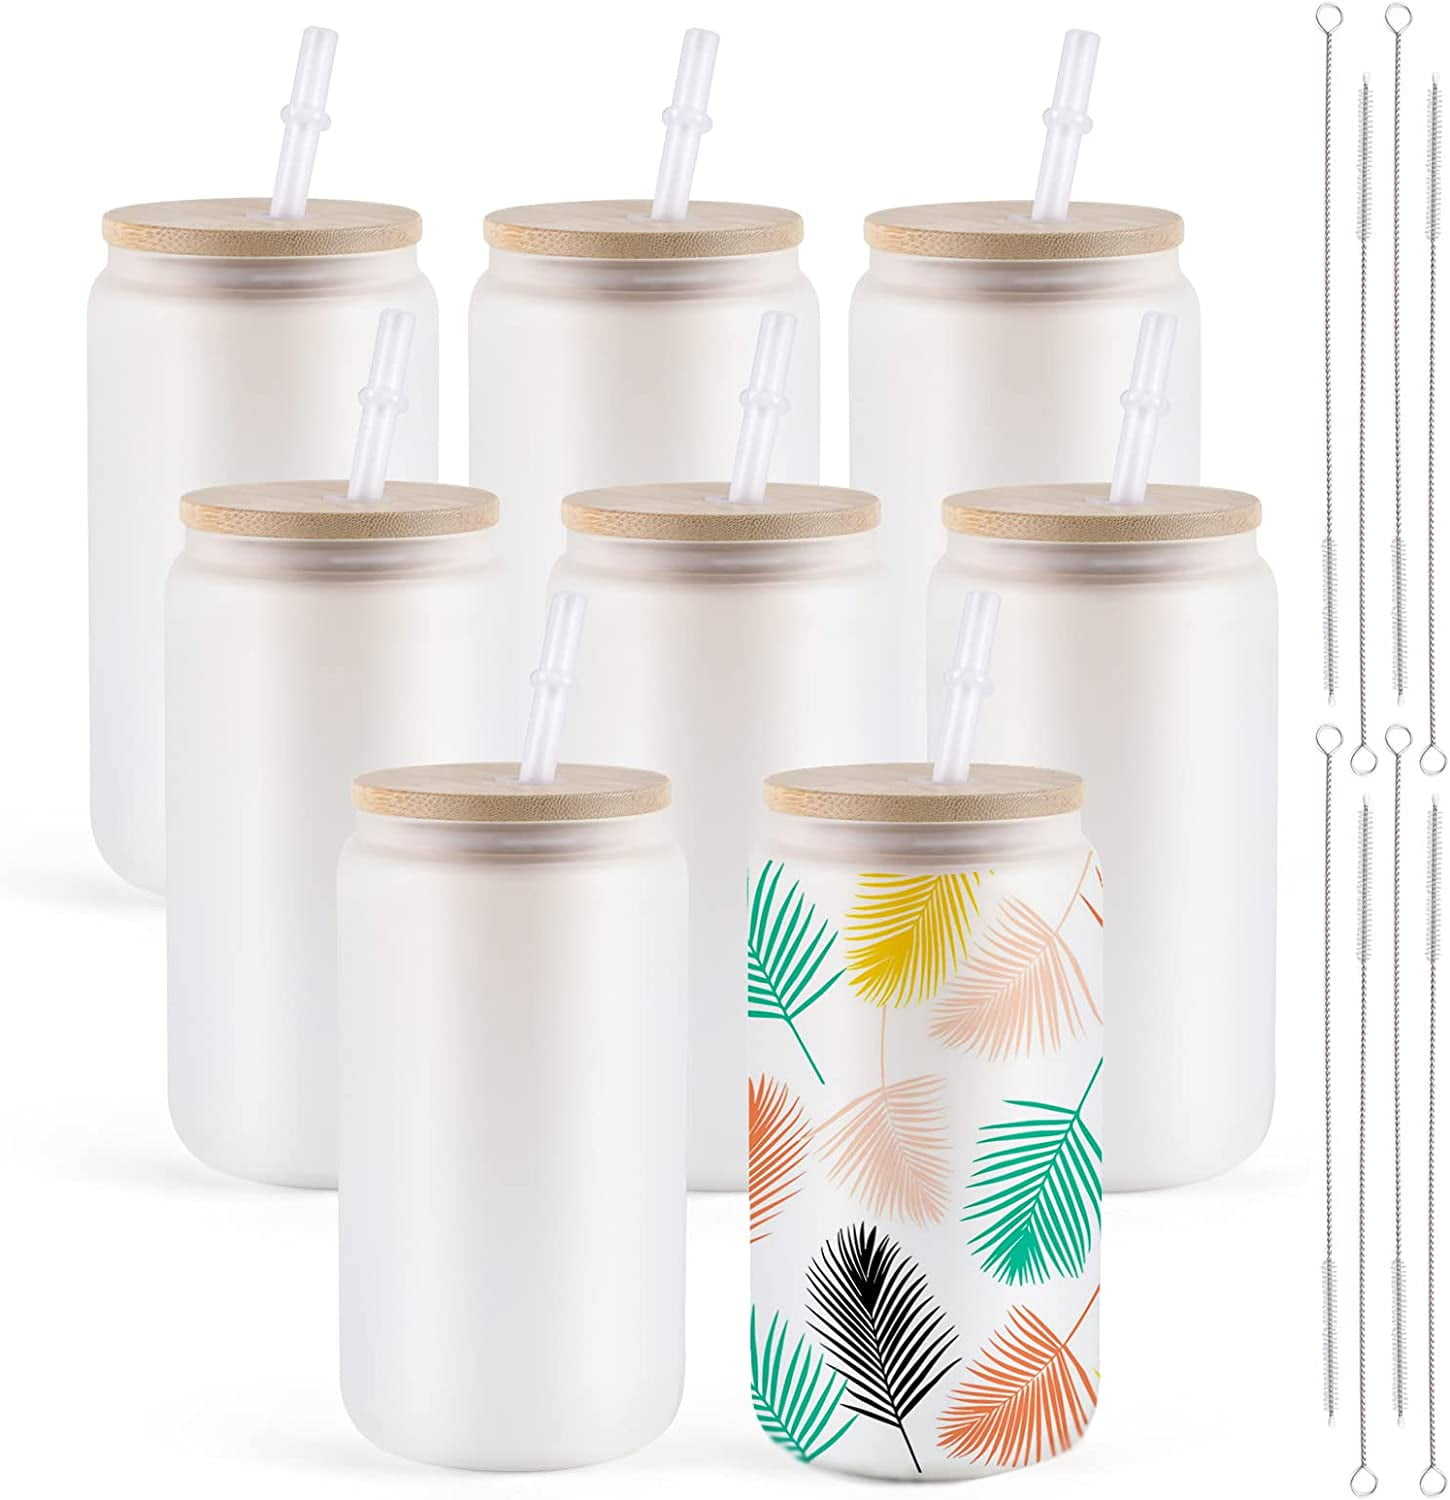 How to Sublimate Frosted Glass Tumblers with a Mug Press - Silhouette School